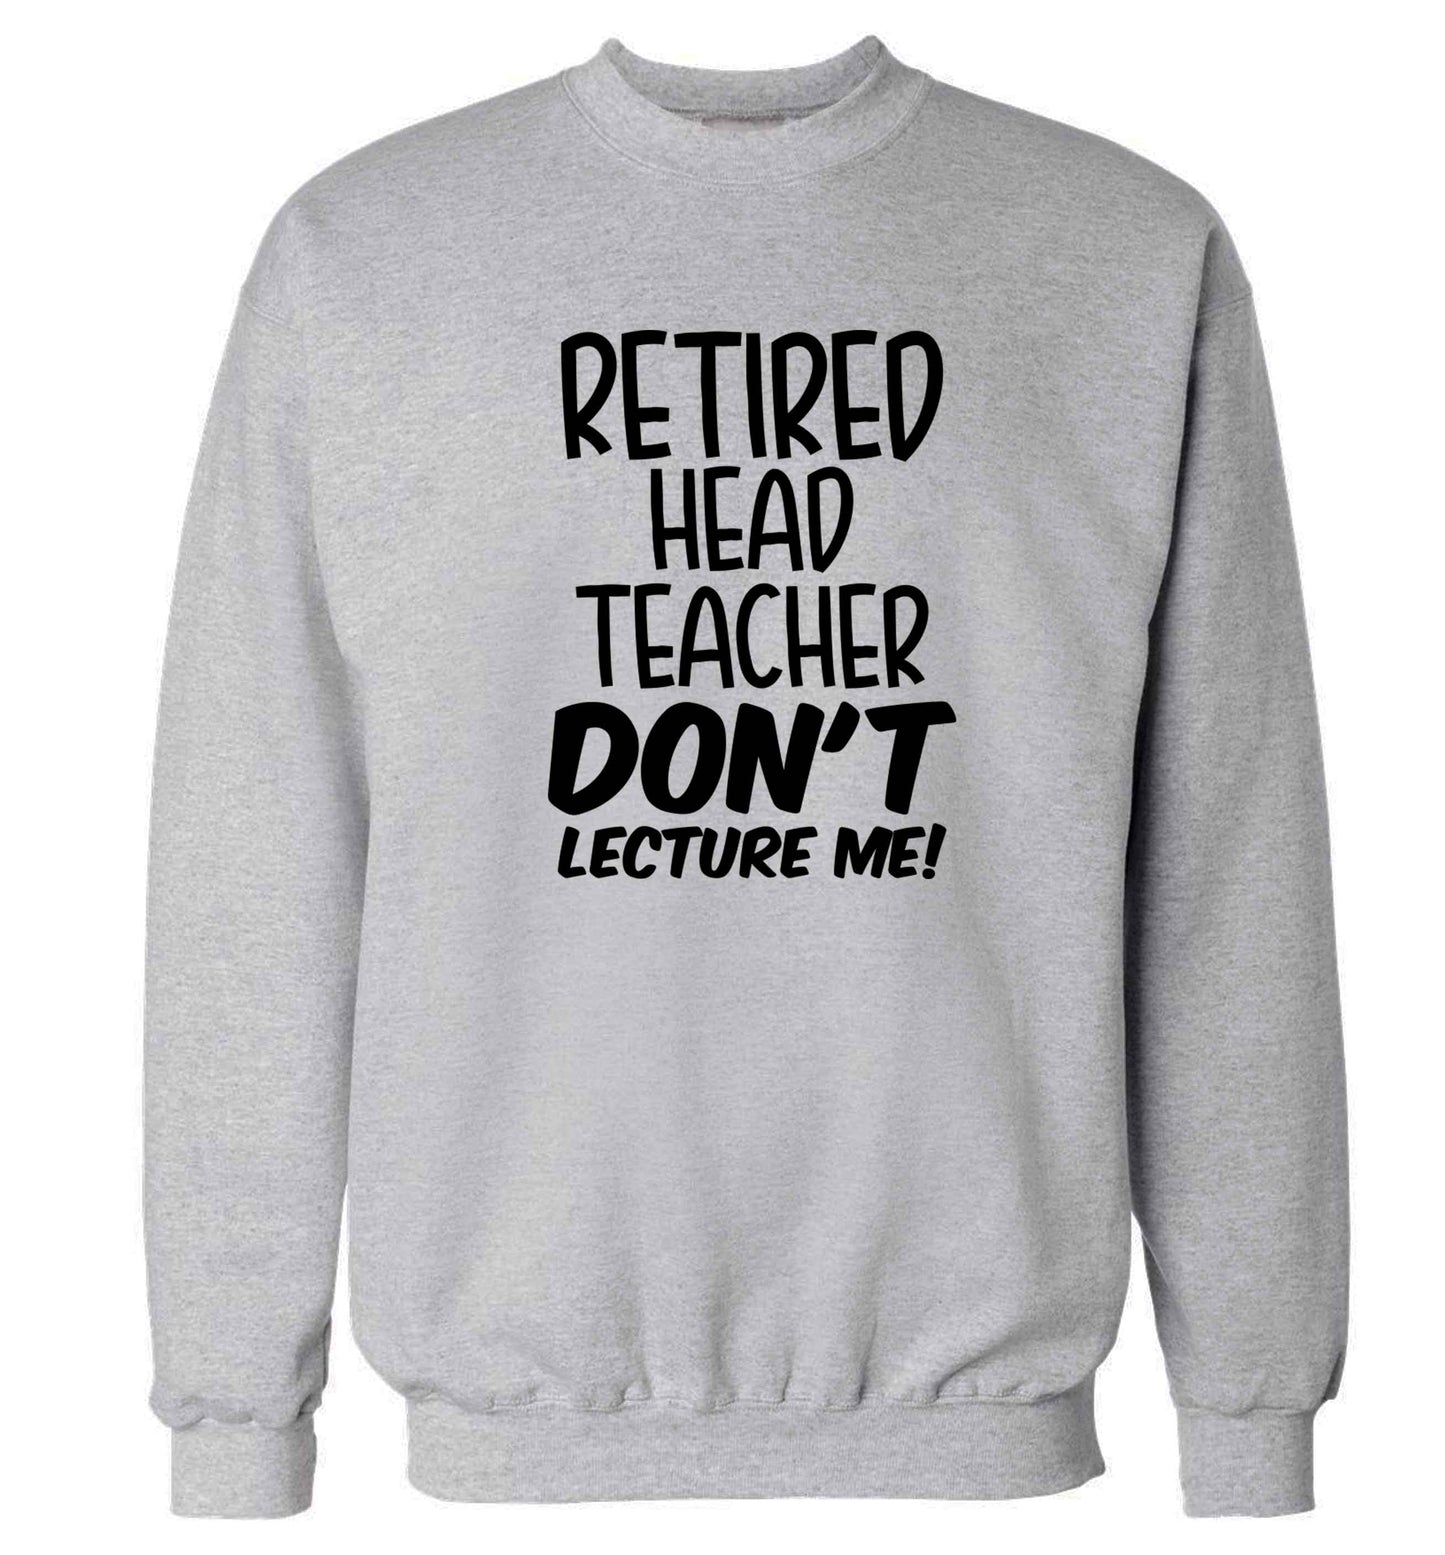 Retired head teacher don't lecture me! Adult's unisex grey Sweater 2XL